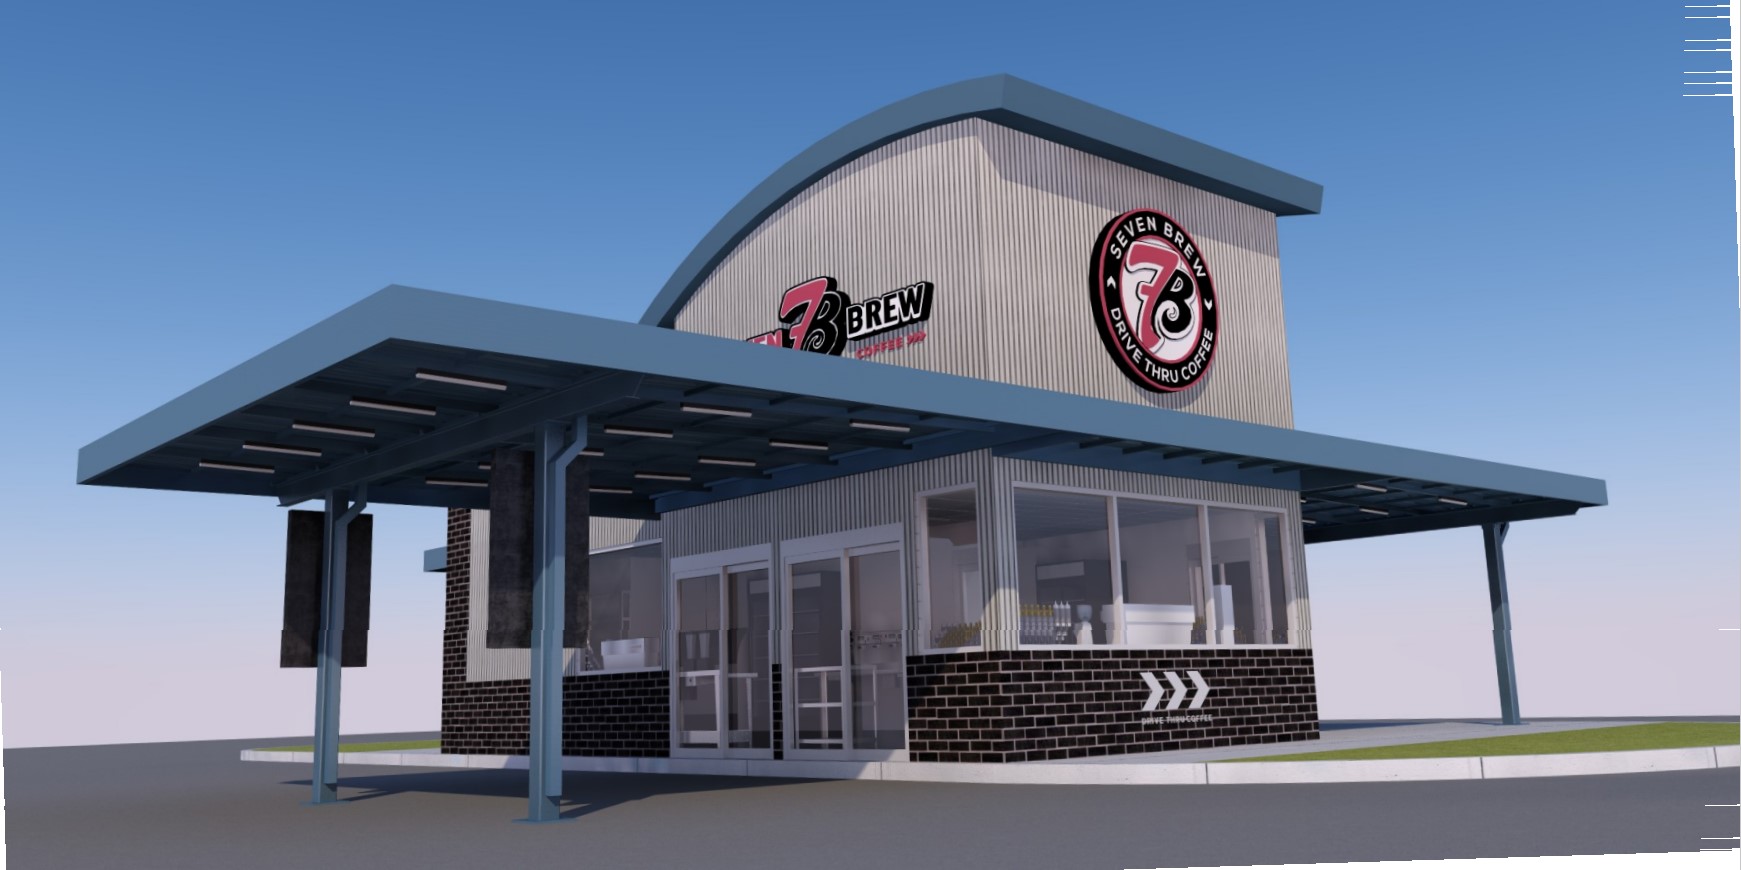 7 Brew Drive Thru Coffee is the proposed new tenant that would take over the location in Huntley Crossings Phase I Lot 4a